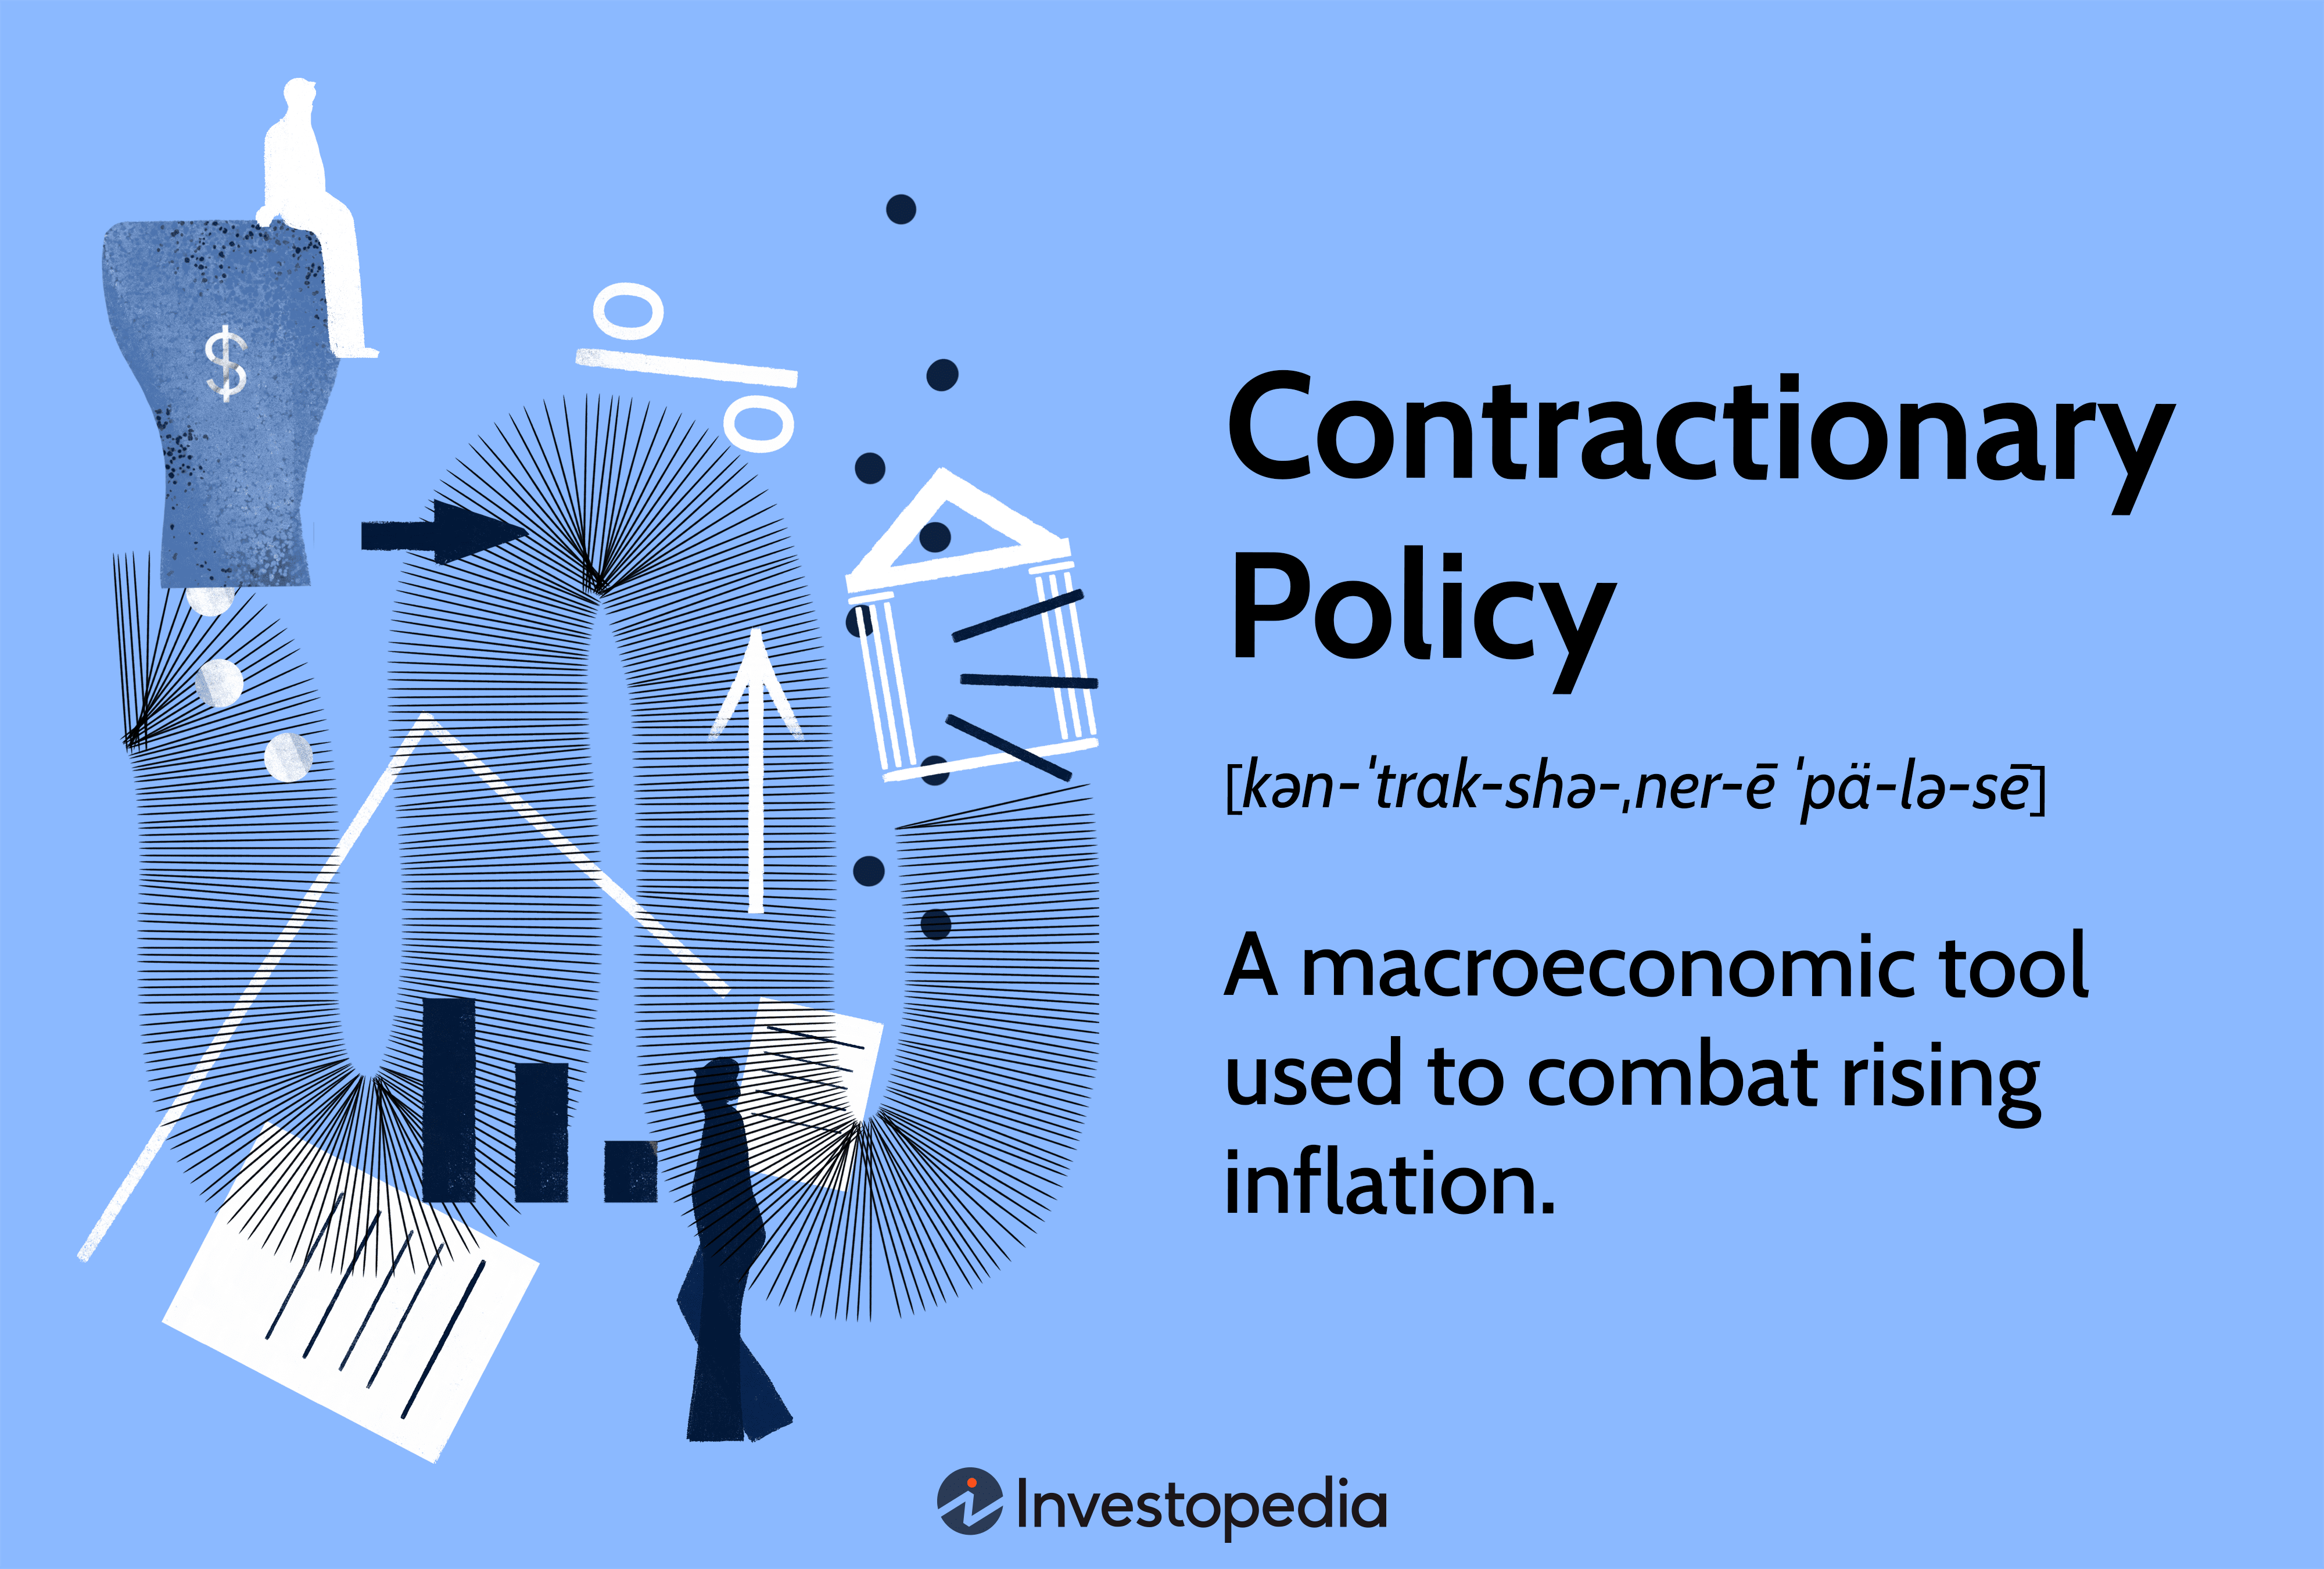 Contractionary Policy: A macroeconomic tool used to combat rising inflation.